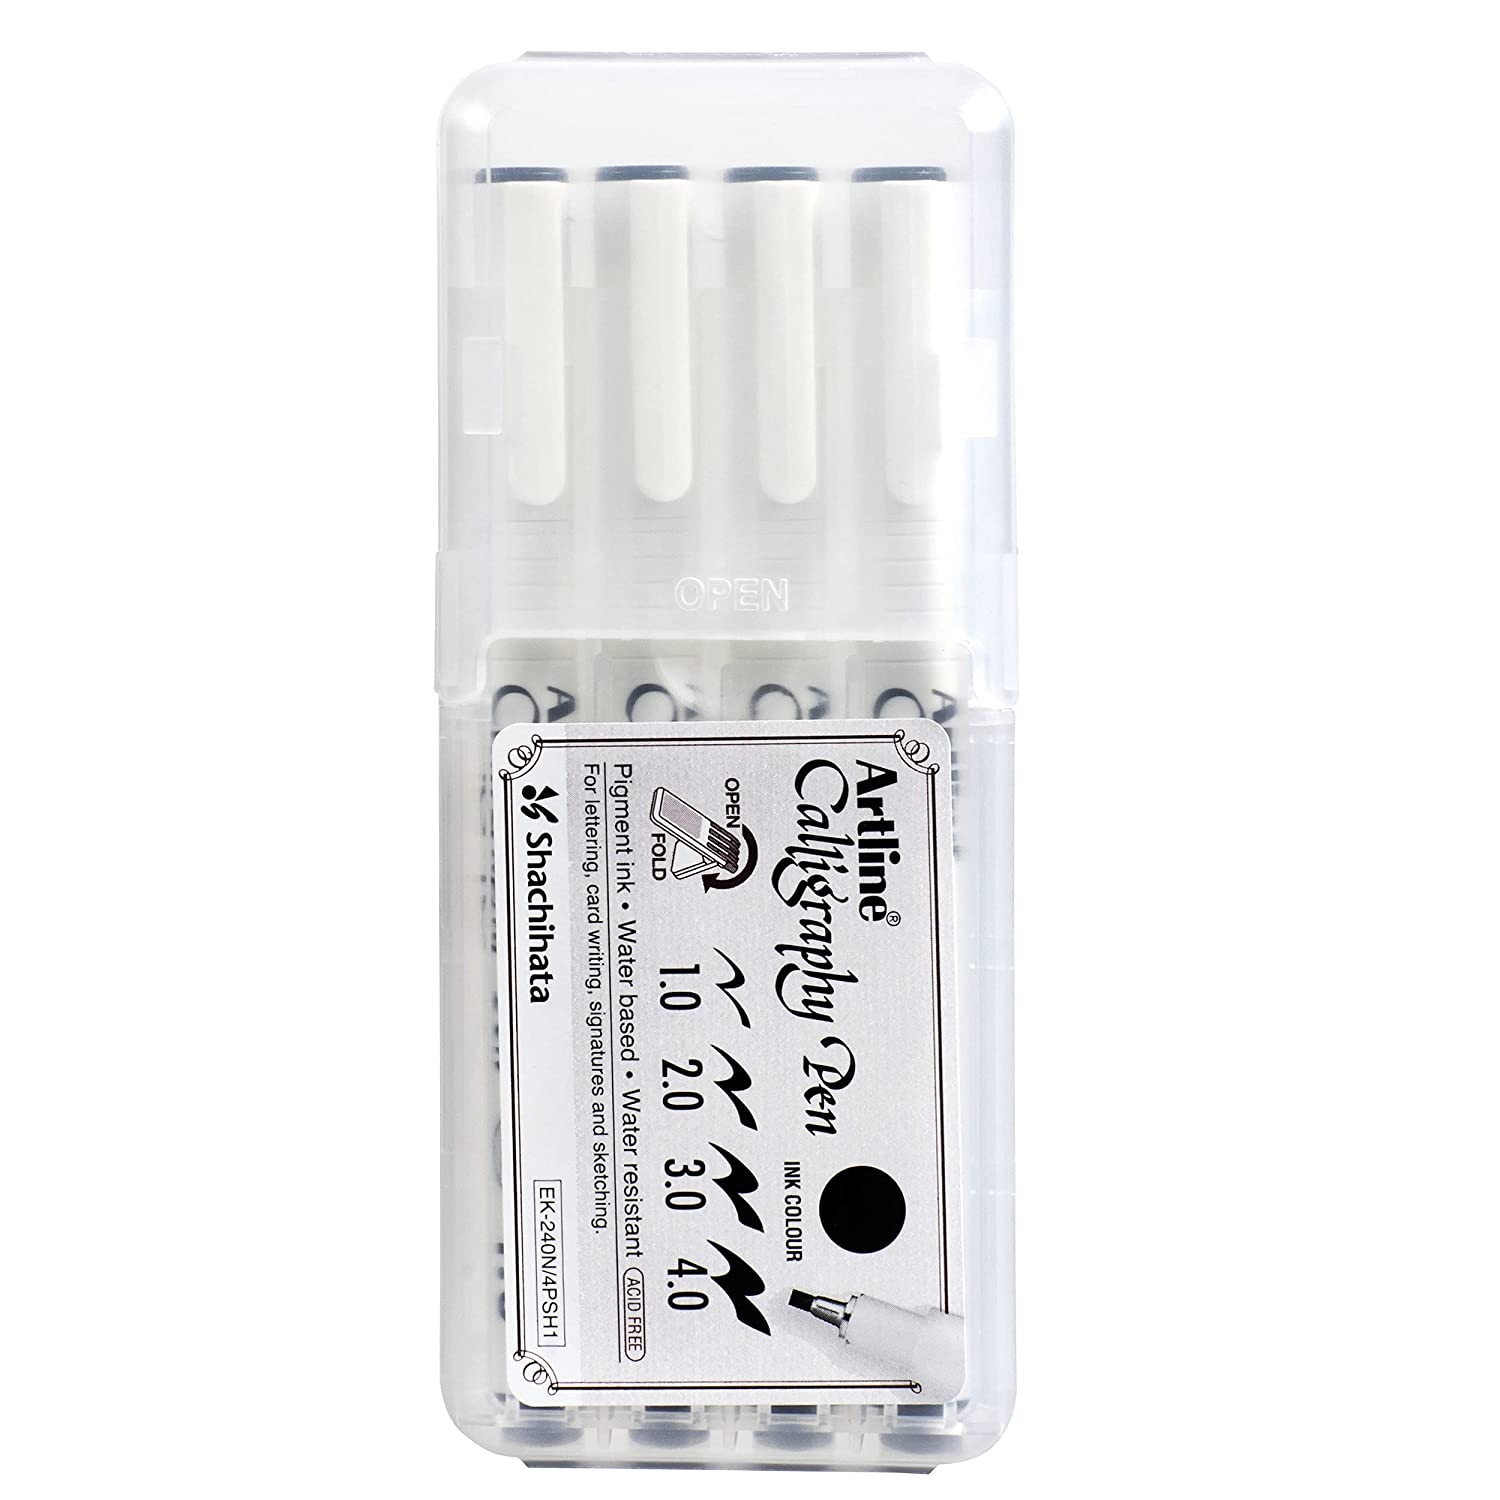 Manuscript Calligraphy Pen Nibs - Carded 3/Pkg-Round Hand - 1, 2 & 3